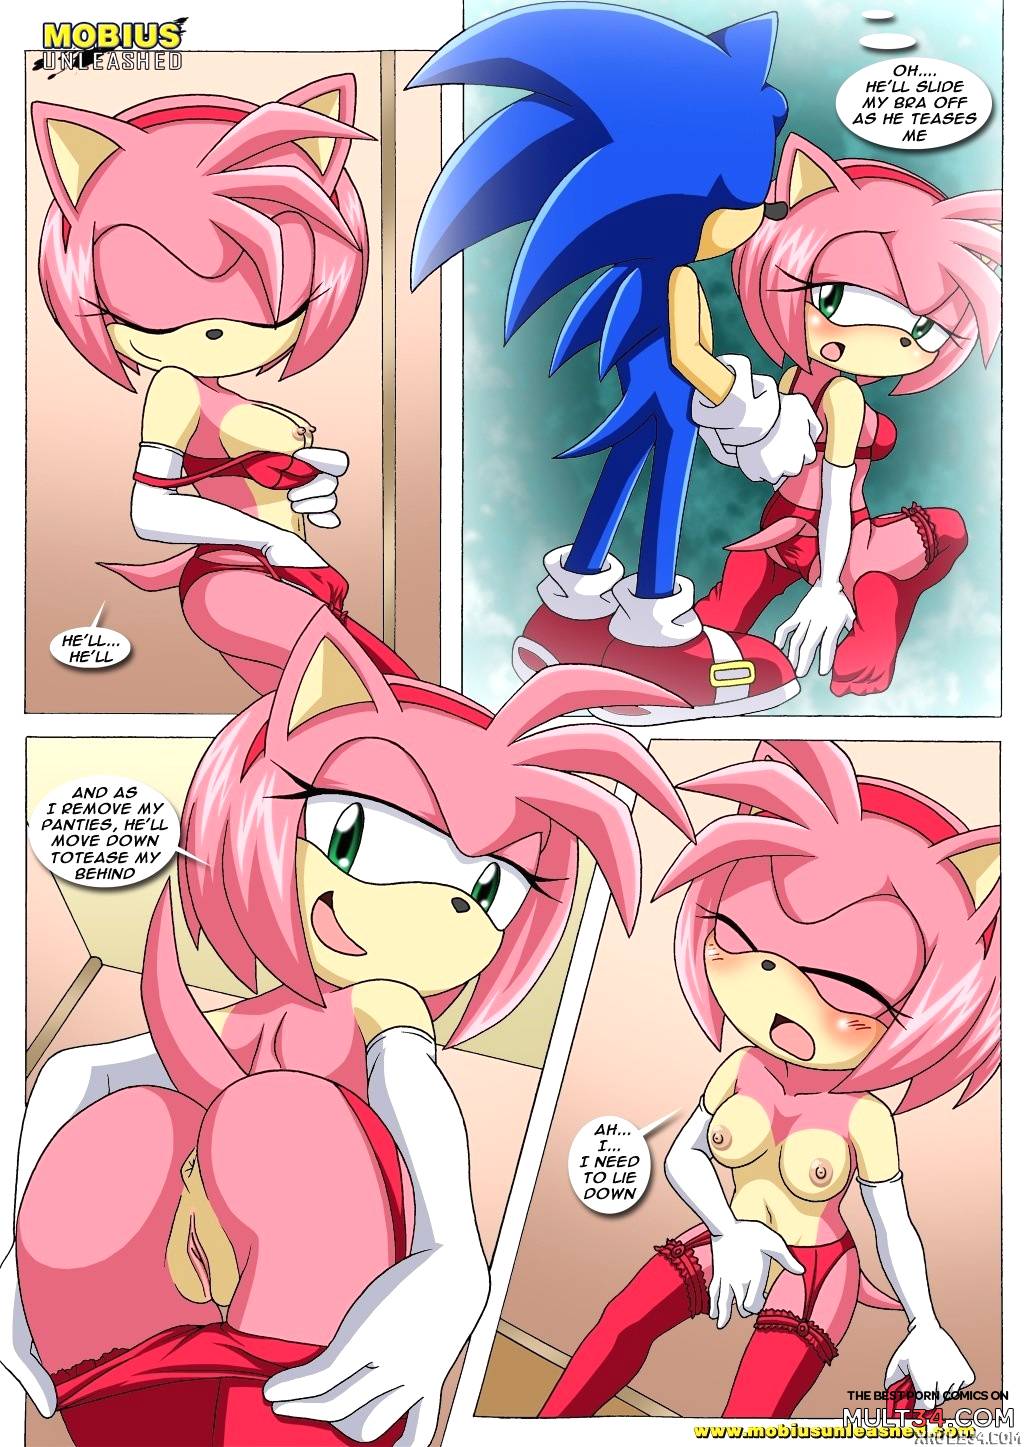 Amy's Fantasy page 4